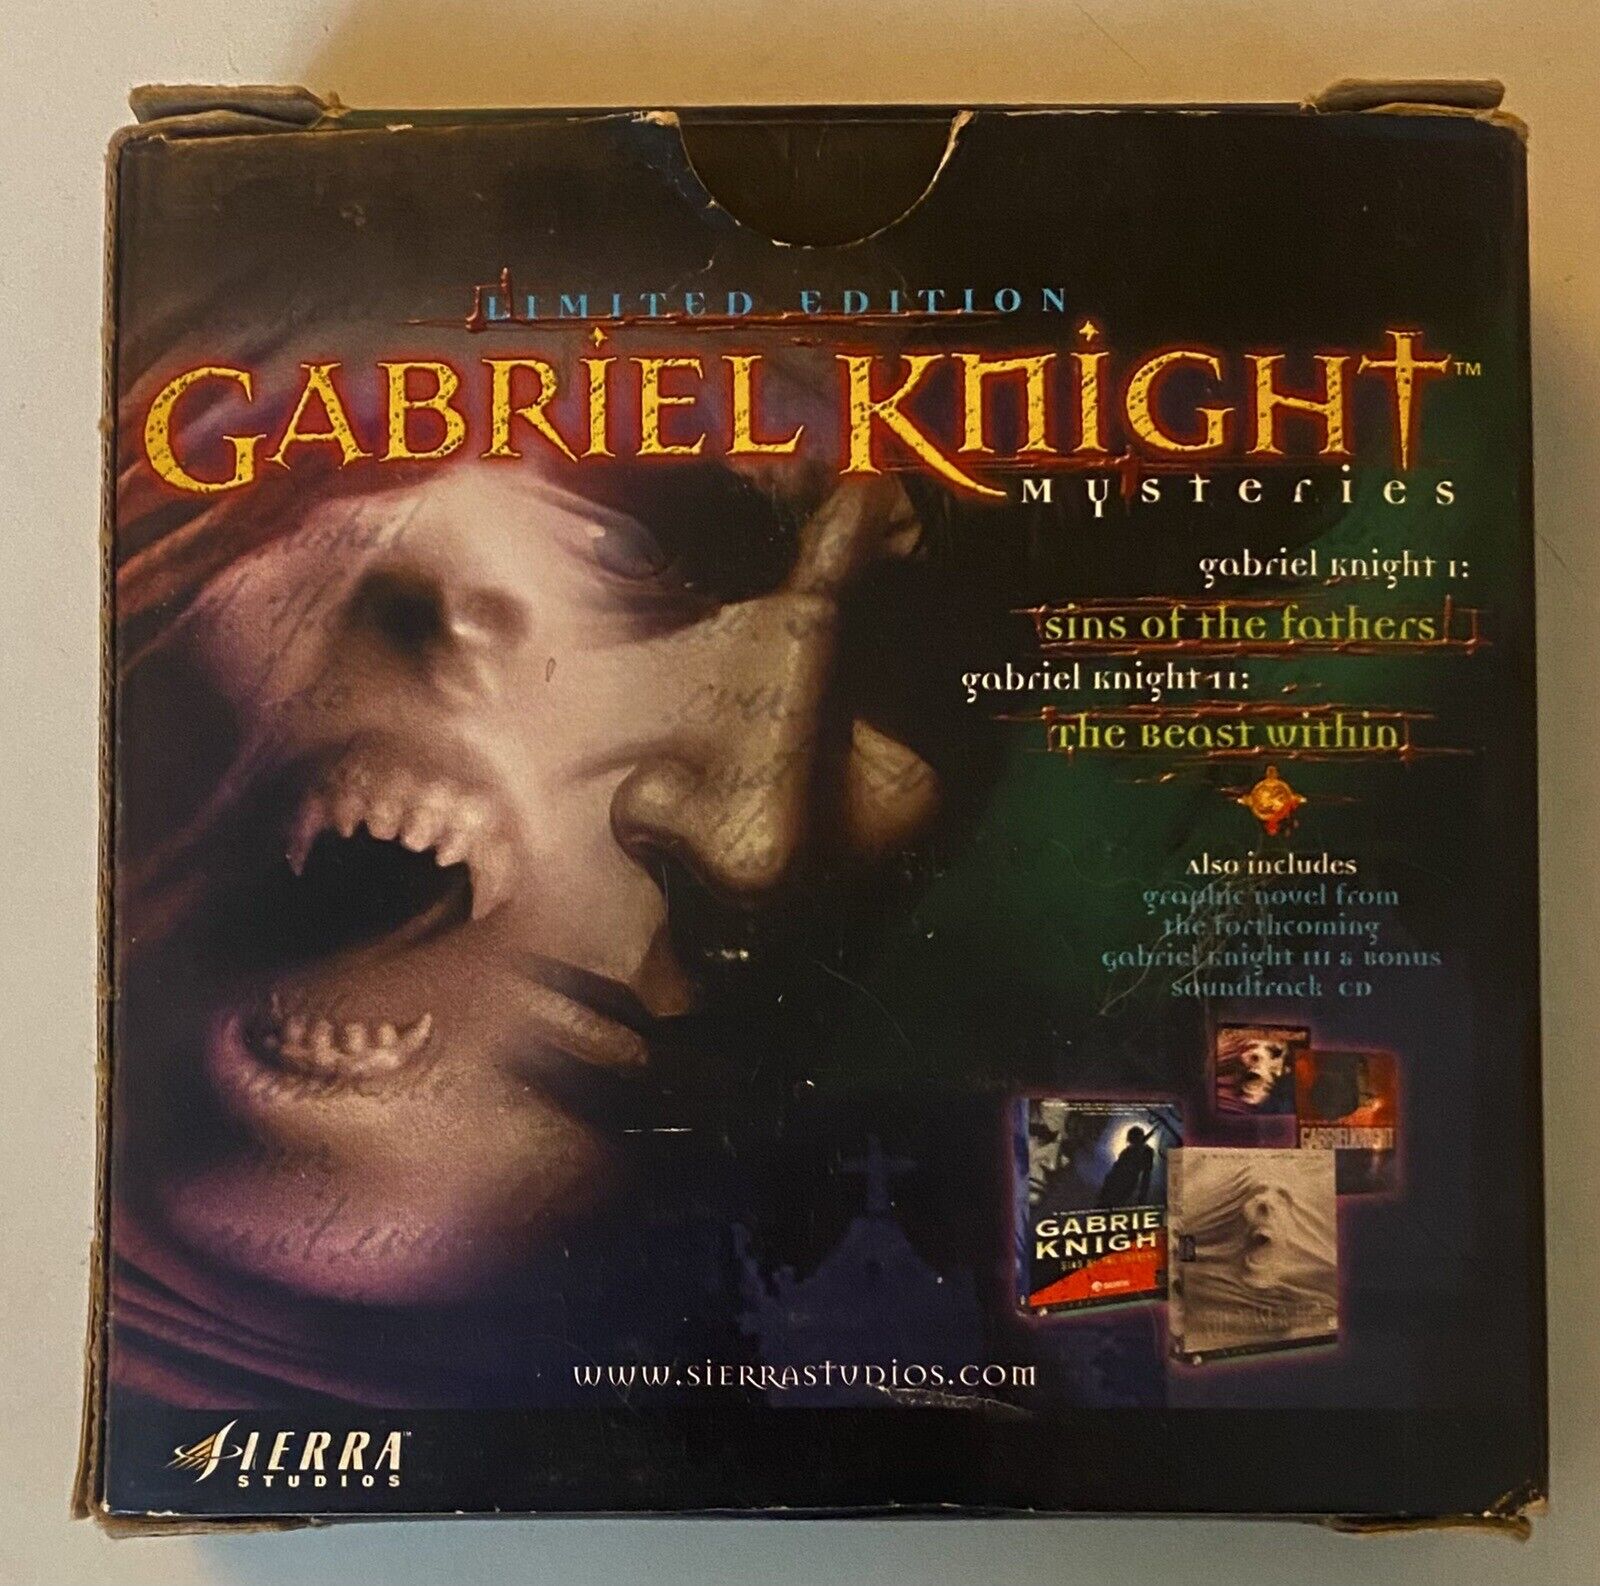 Gabriel Knight Mysteries: Limited Edition PC Beast Within, Sins Fathers